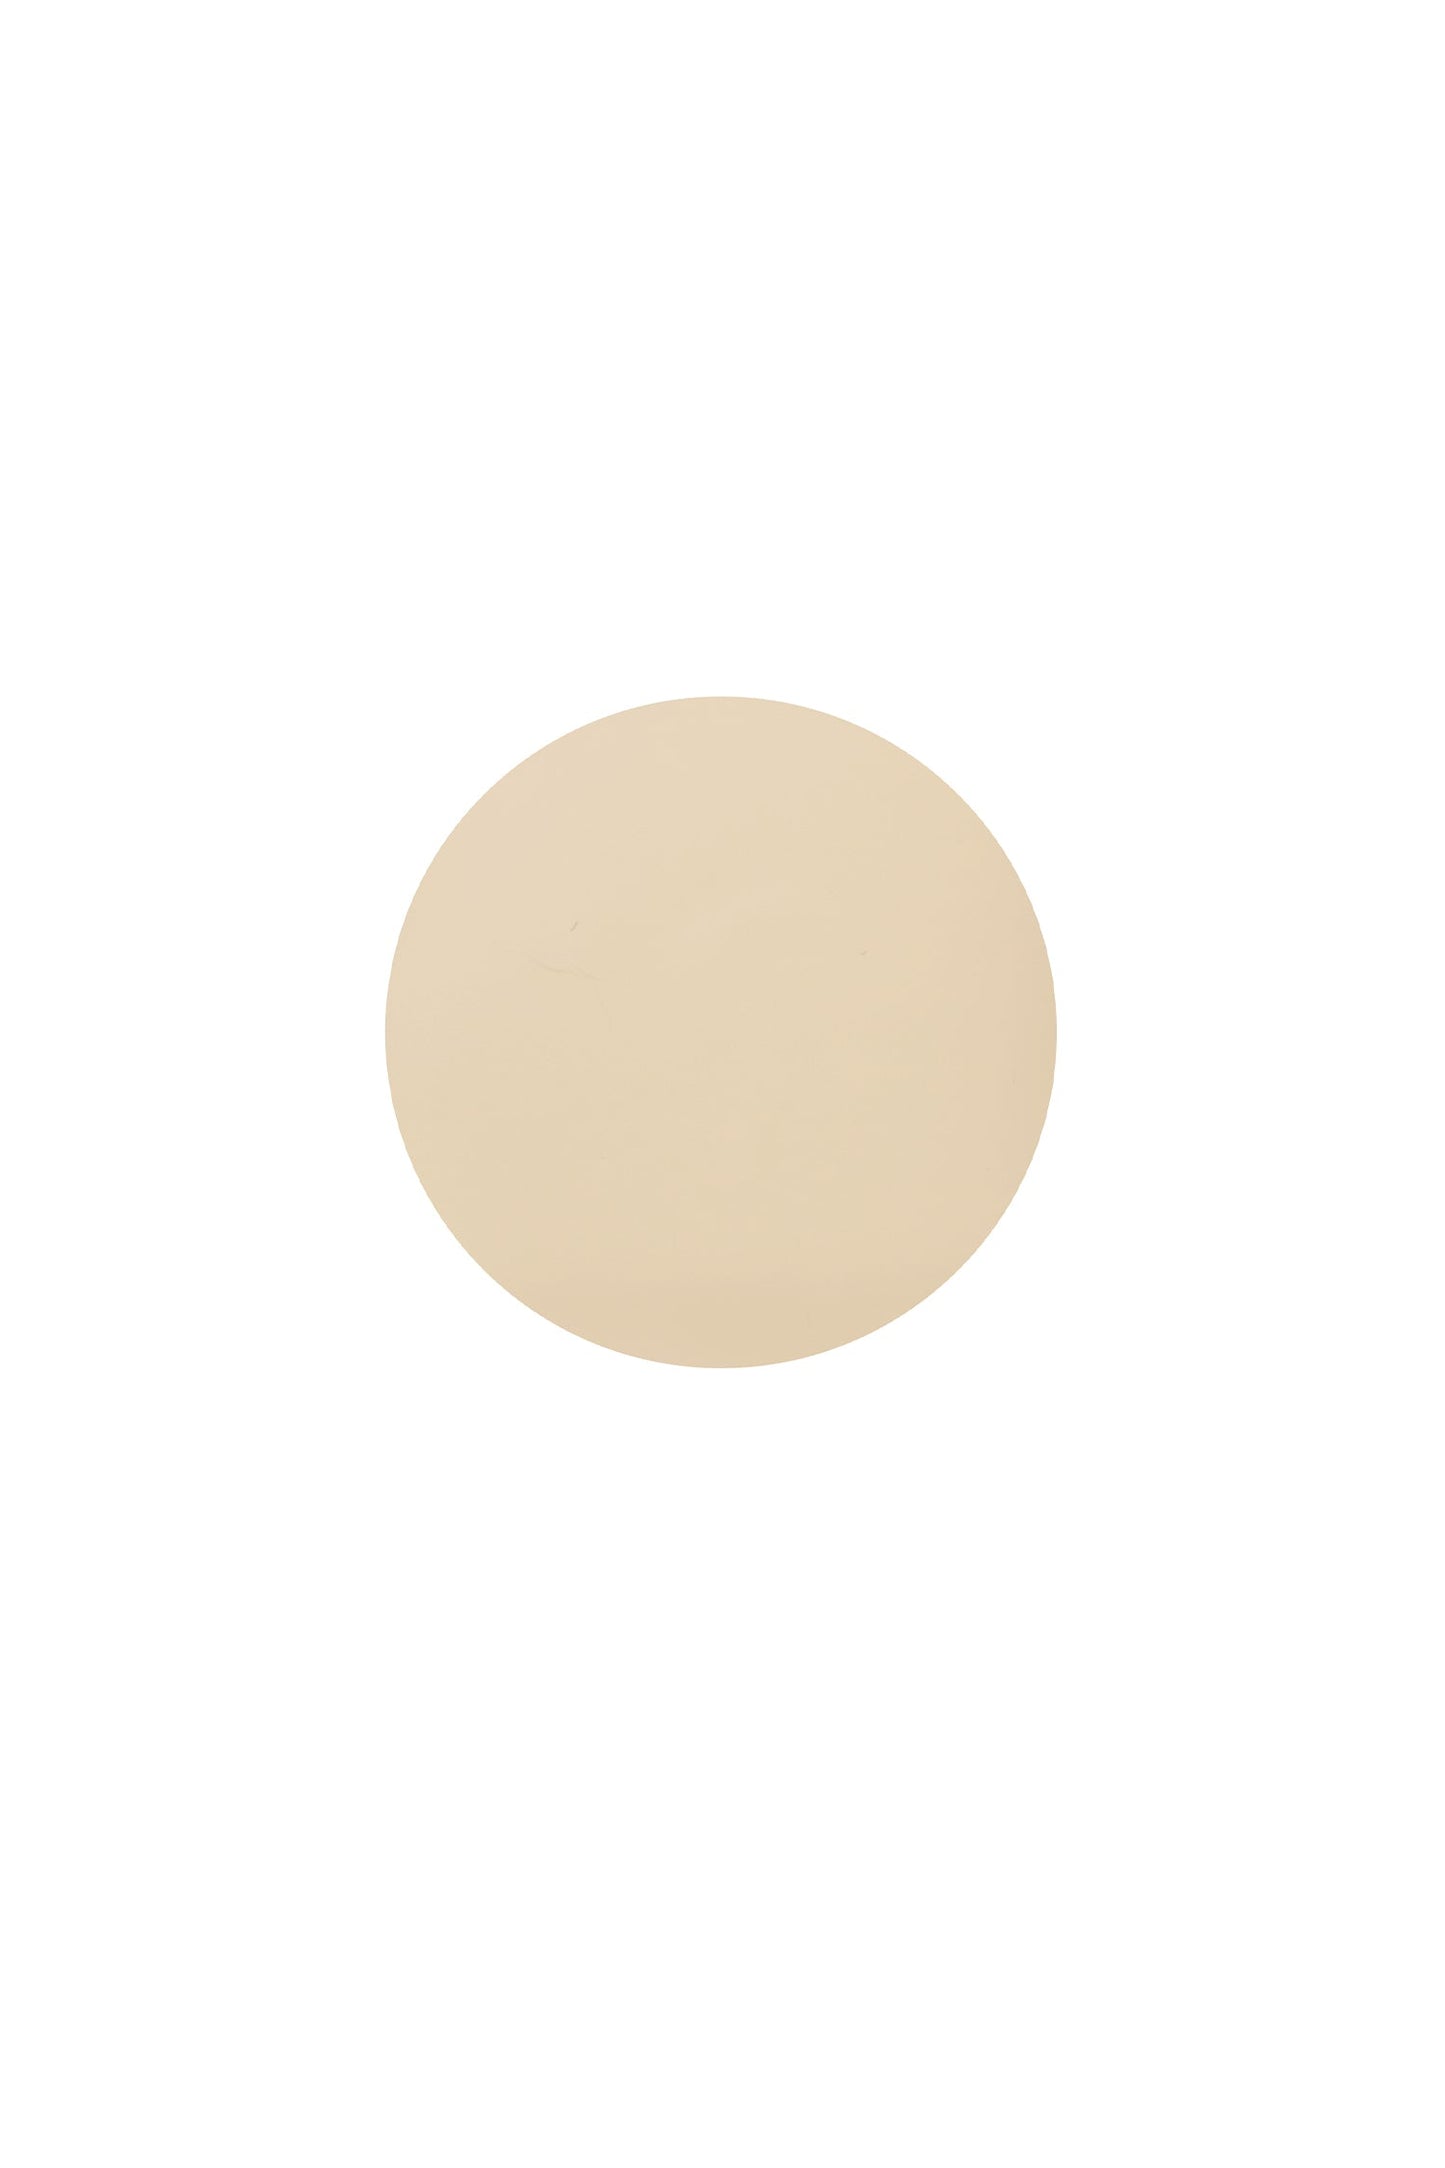 Introducing FAIR foundation compact round refill, that will create a flawless doll-like look